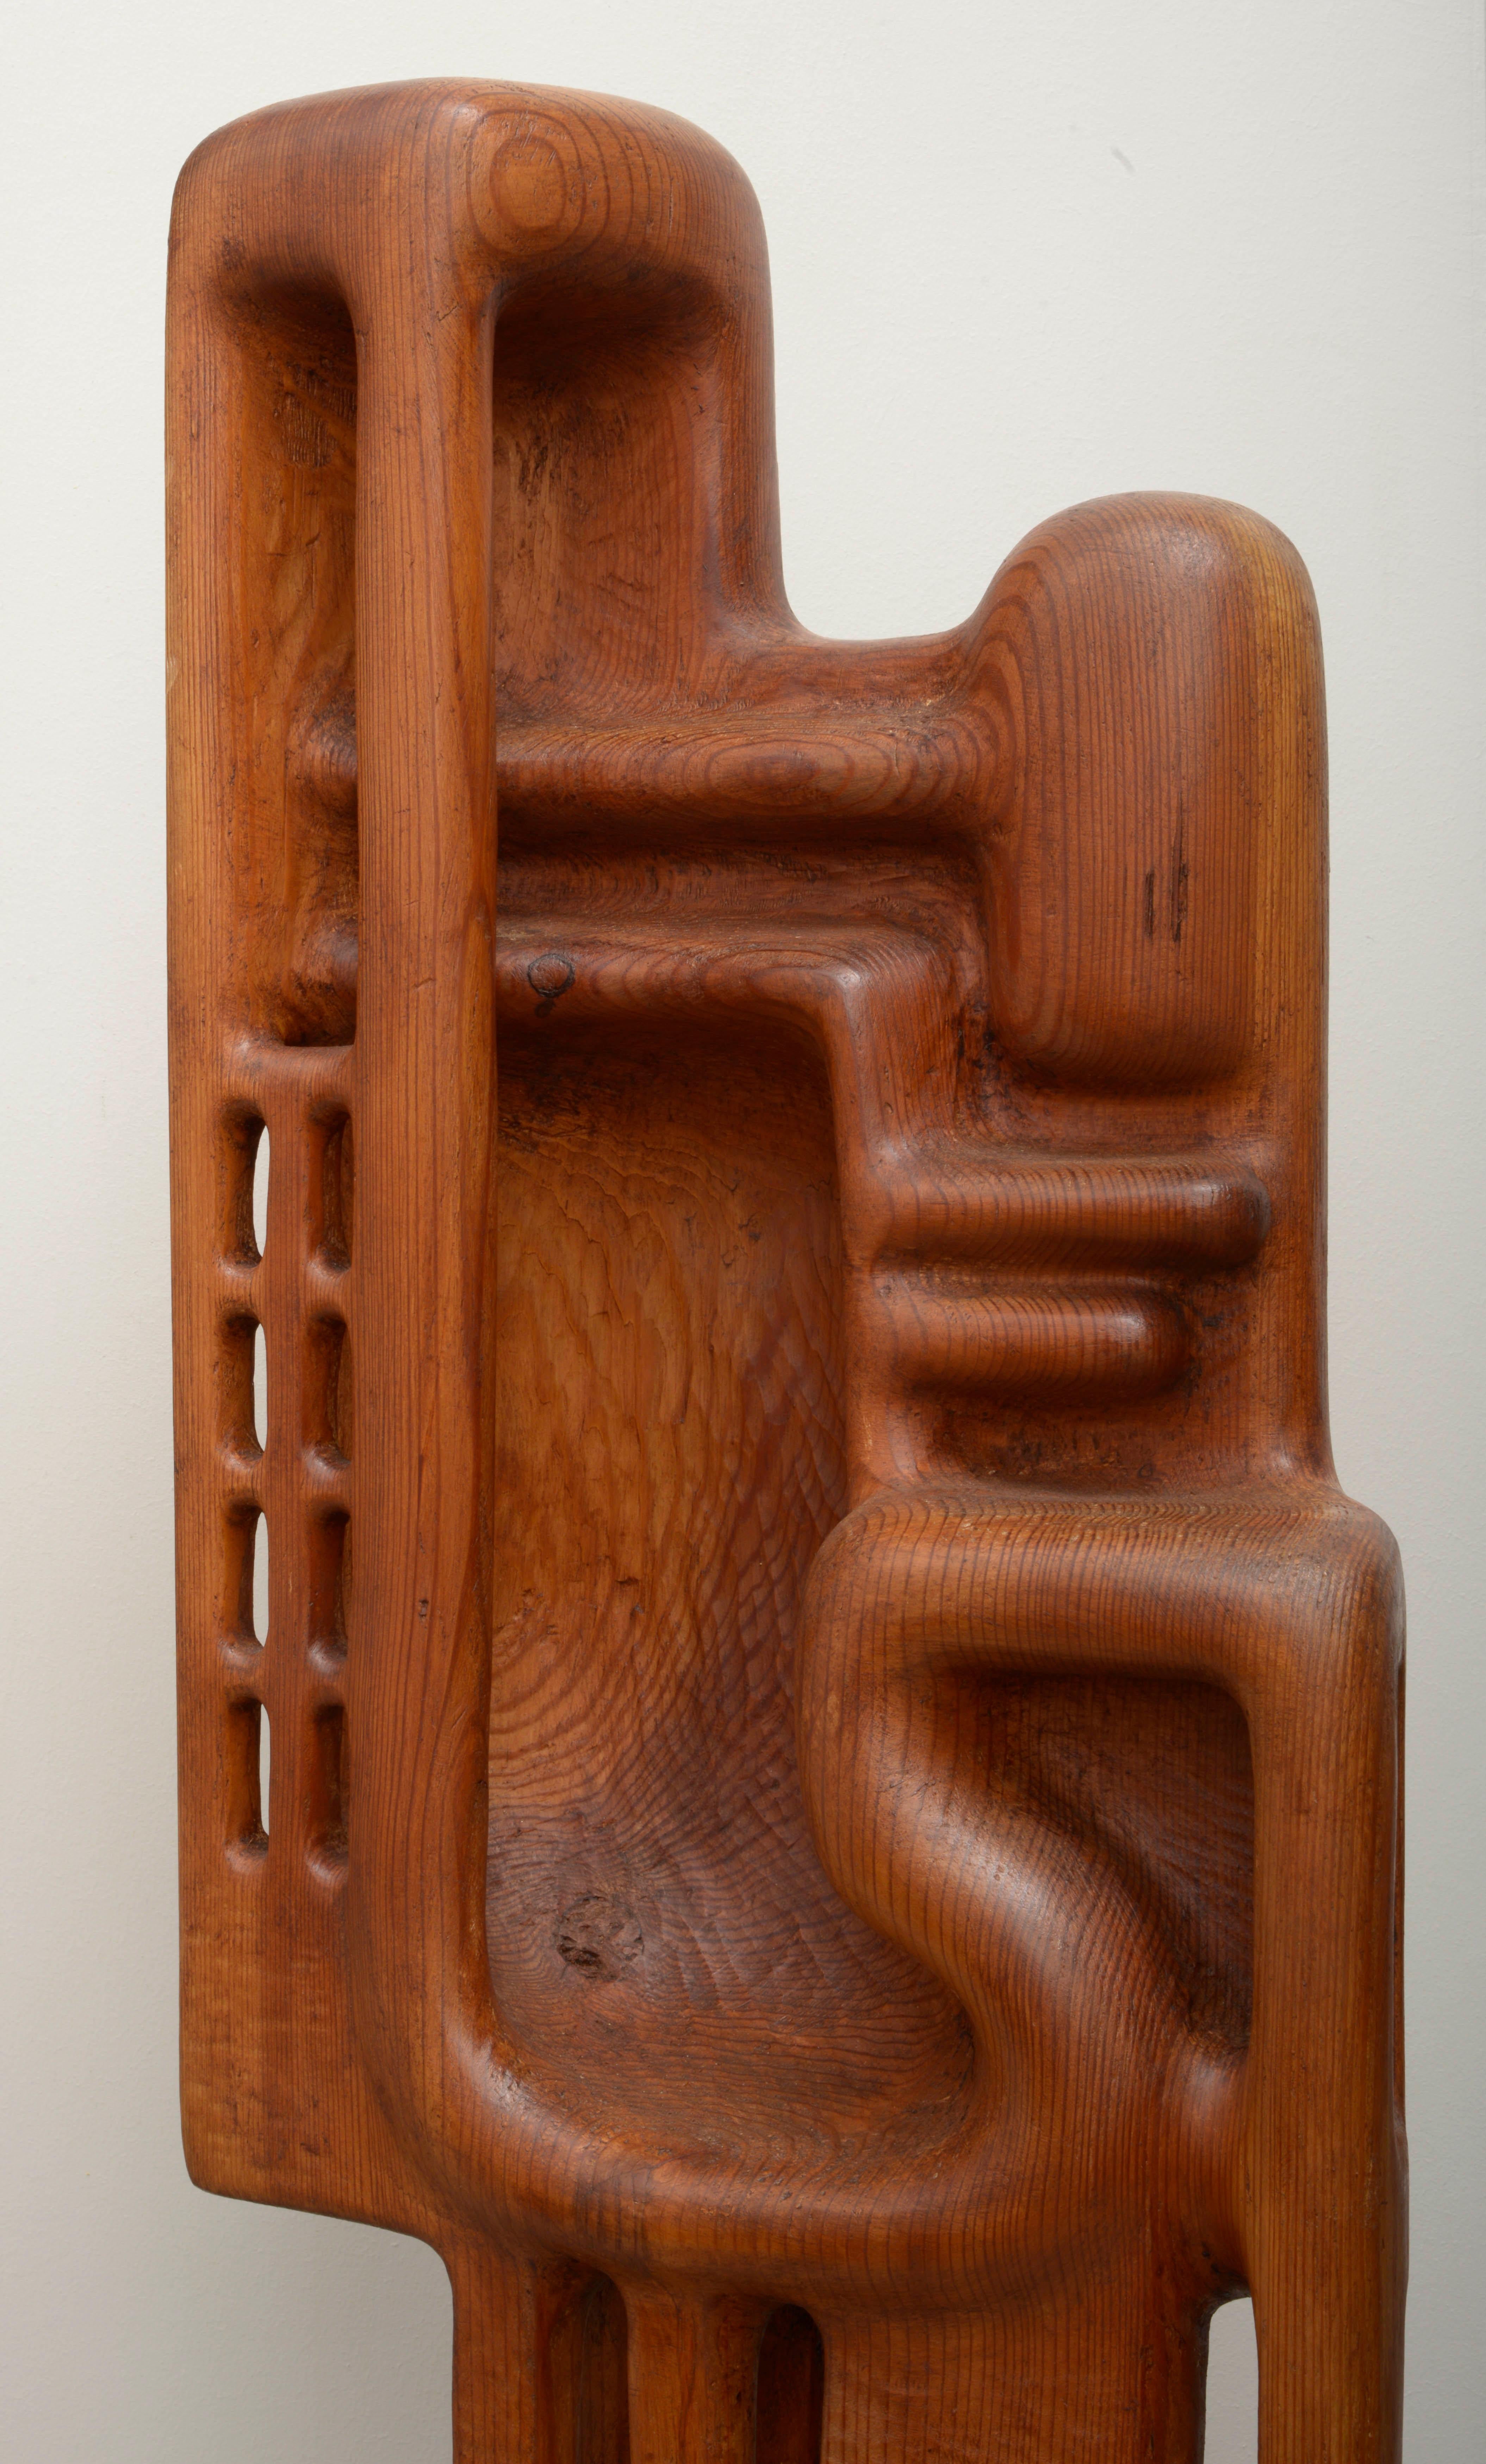 Henryk Burzec 1970s Wood Sculpture In Good Condition For Sale In Brussels, BE